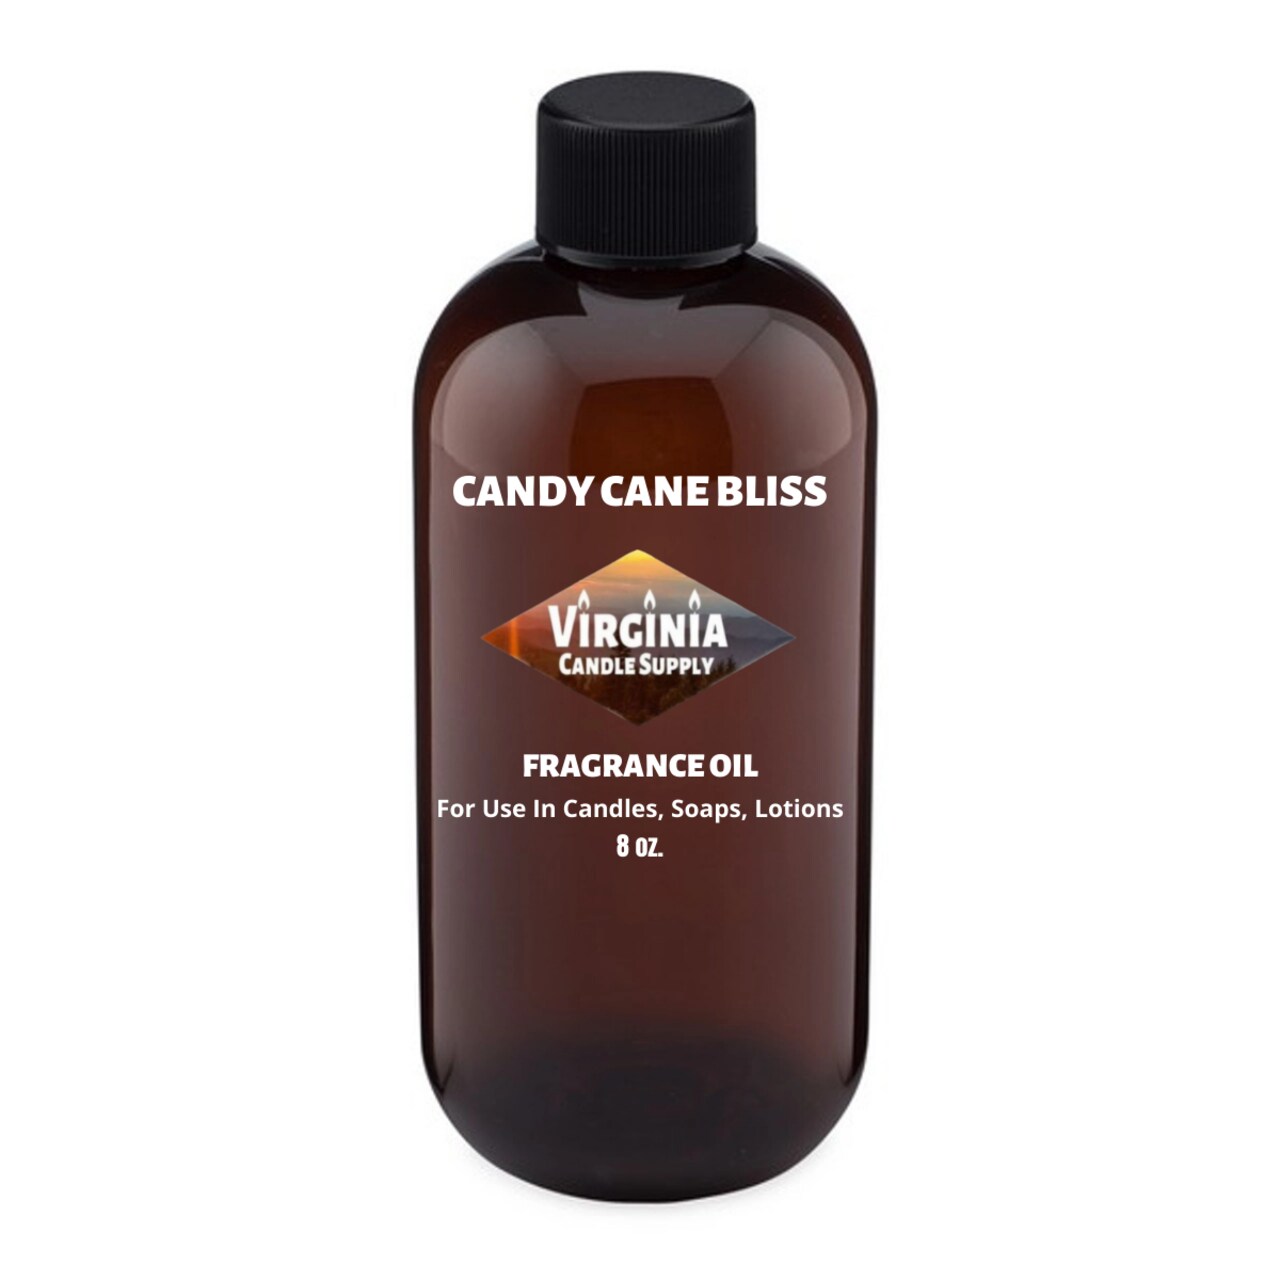 Candy Cane Bliss Fragrance Oil (Our Version of the Brand Name) (8 oz Bottle) for Candle Making, Soap Making, Tart Making, Room Sprays, Lotions, Car Fresheners, Slime, Bath Bombs, Warmers&#x2026;